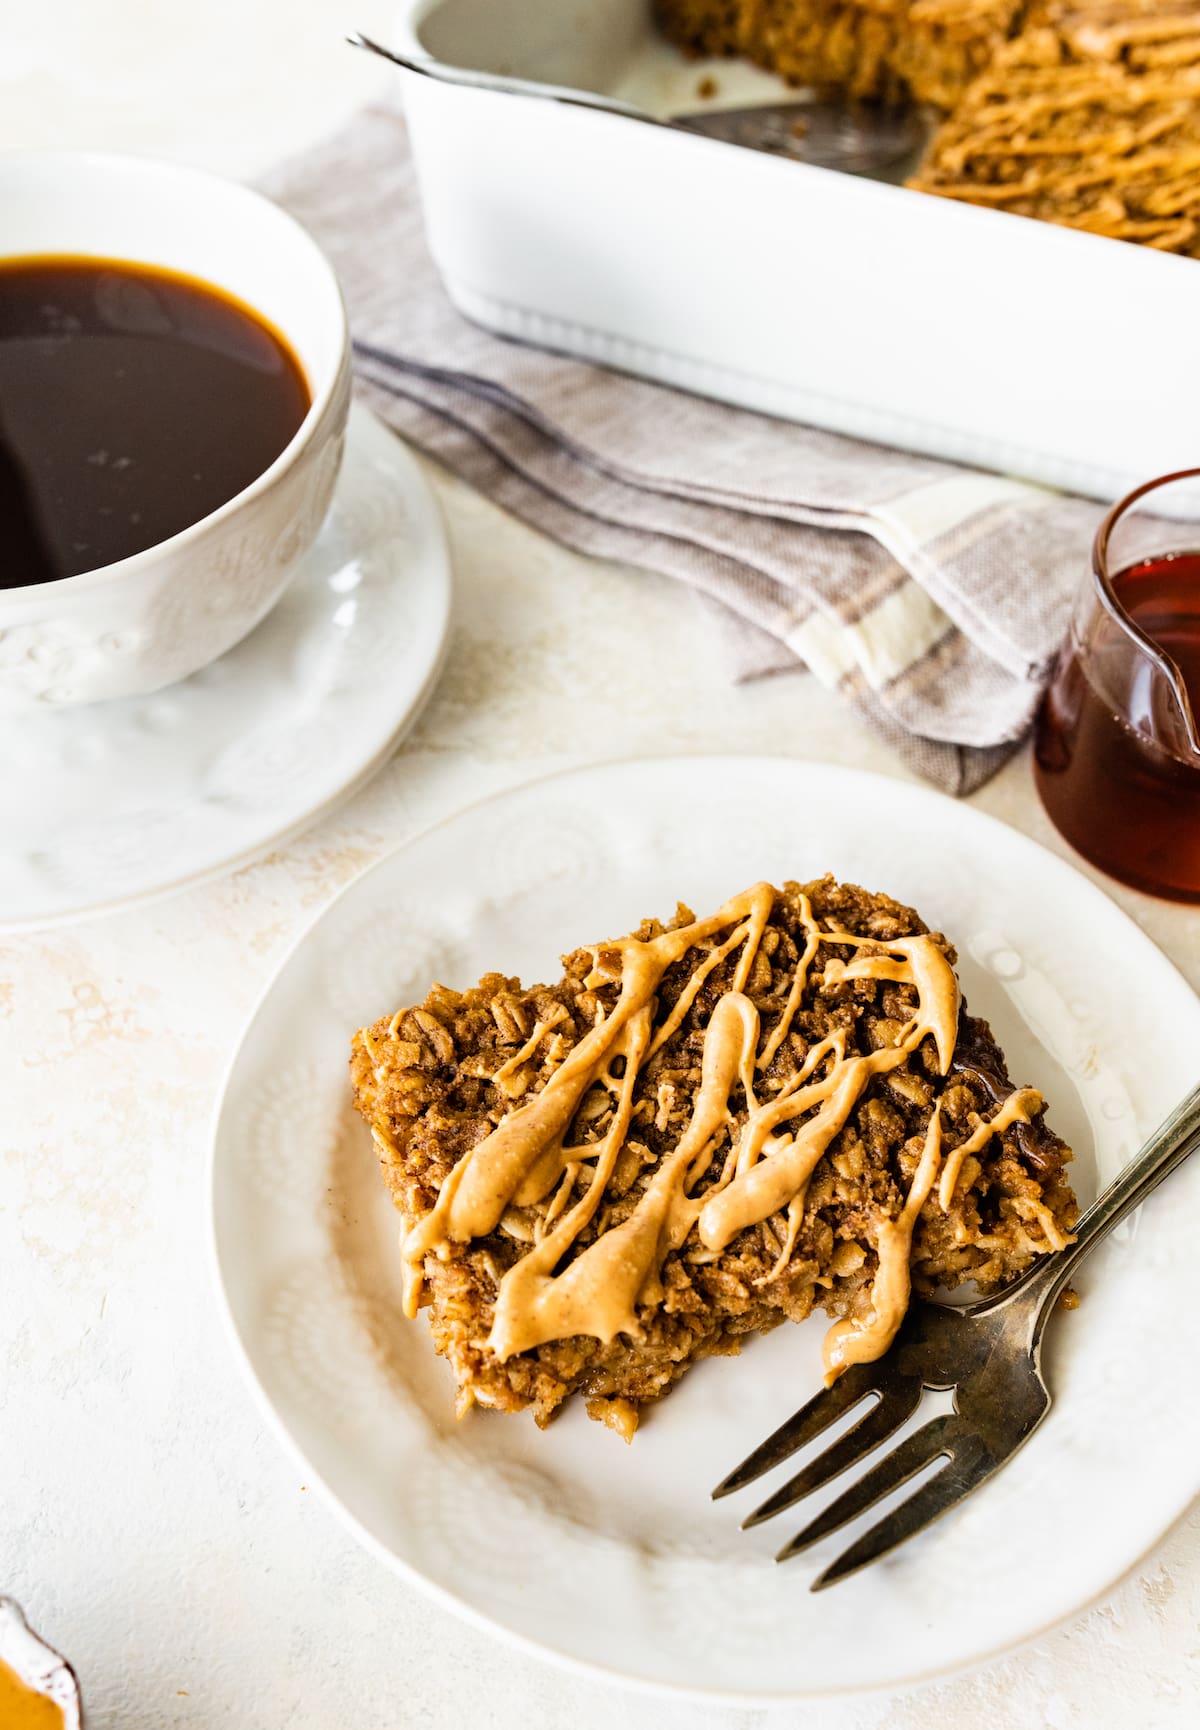 A slice of coffee baked oatmeal on a small plate with a metal fork near a cup of coffee.